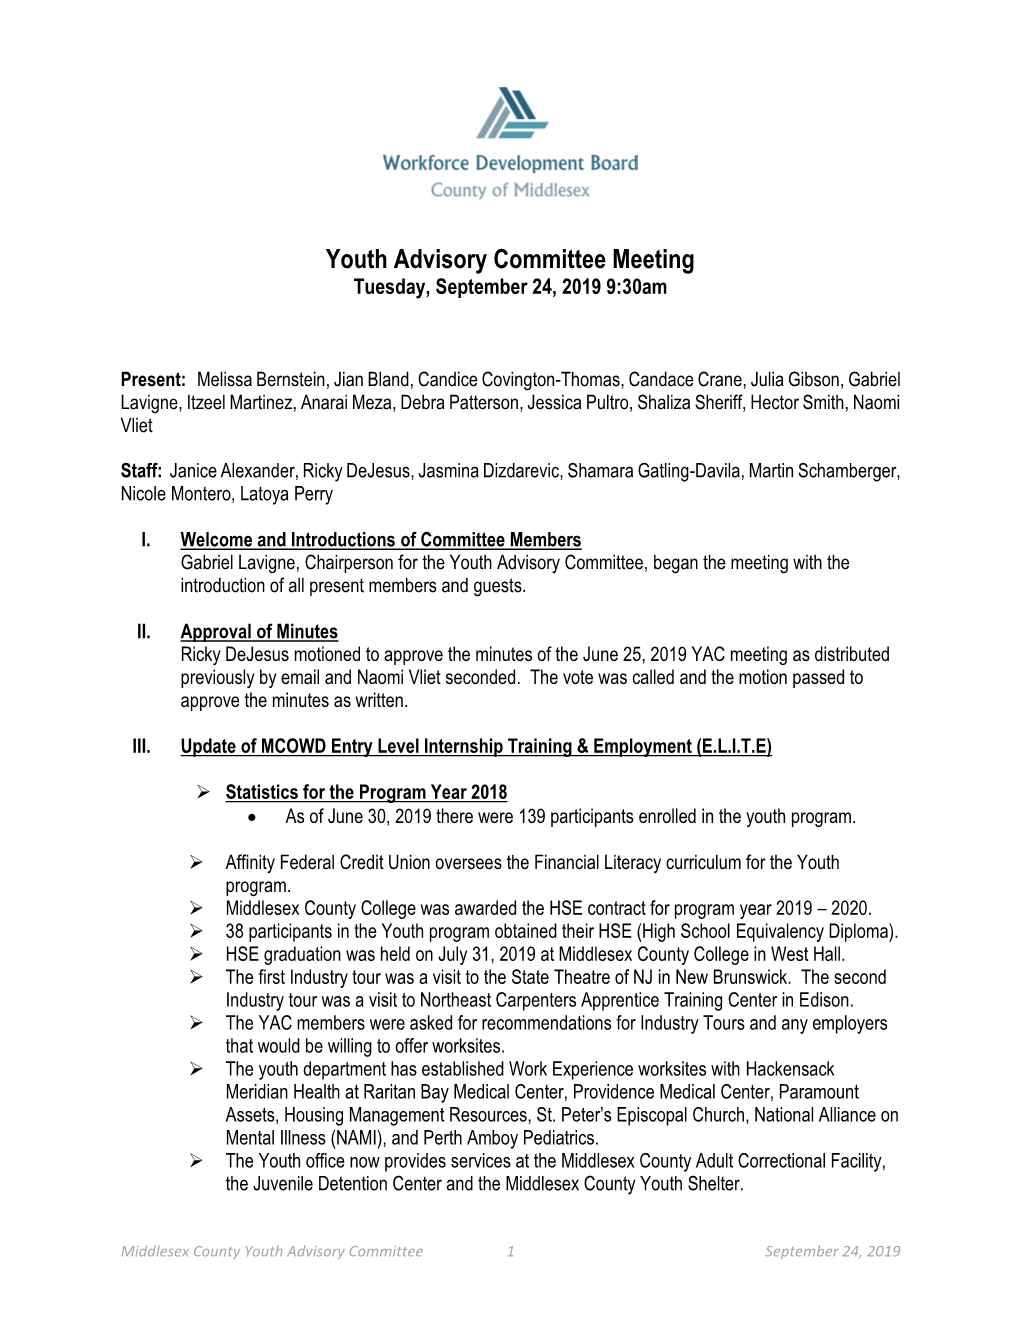 Youth Advisory Committee Meeting Tuesday, September 24, 2019 9:30Am